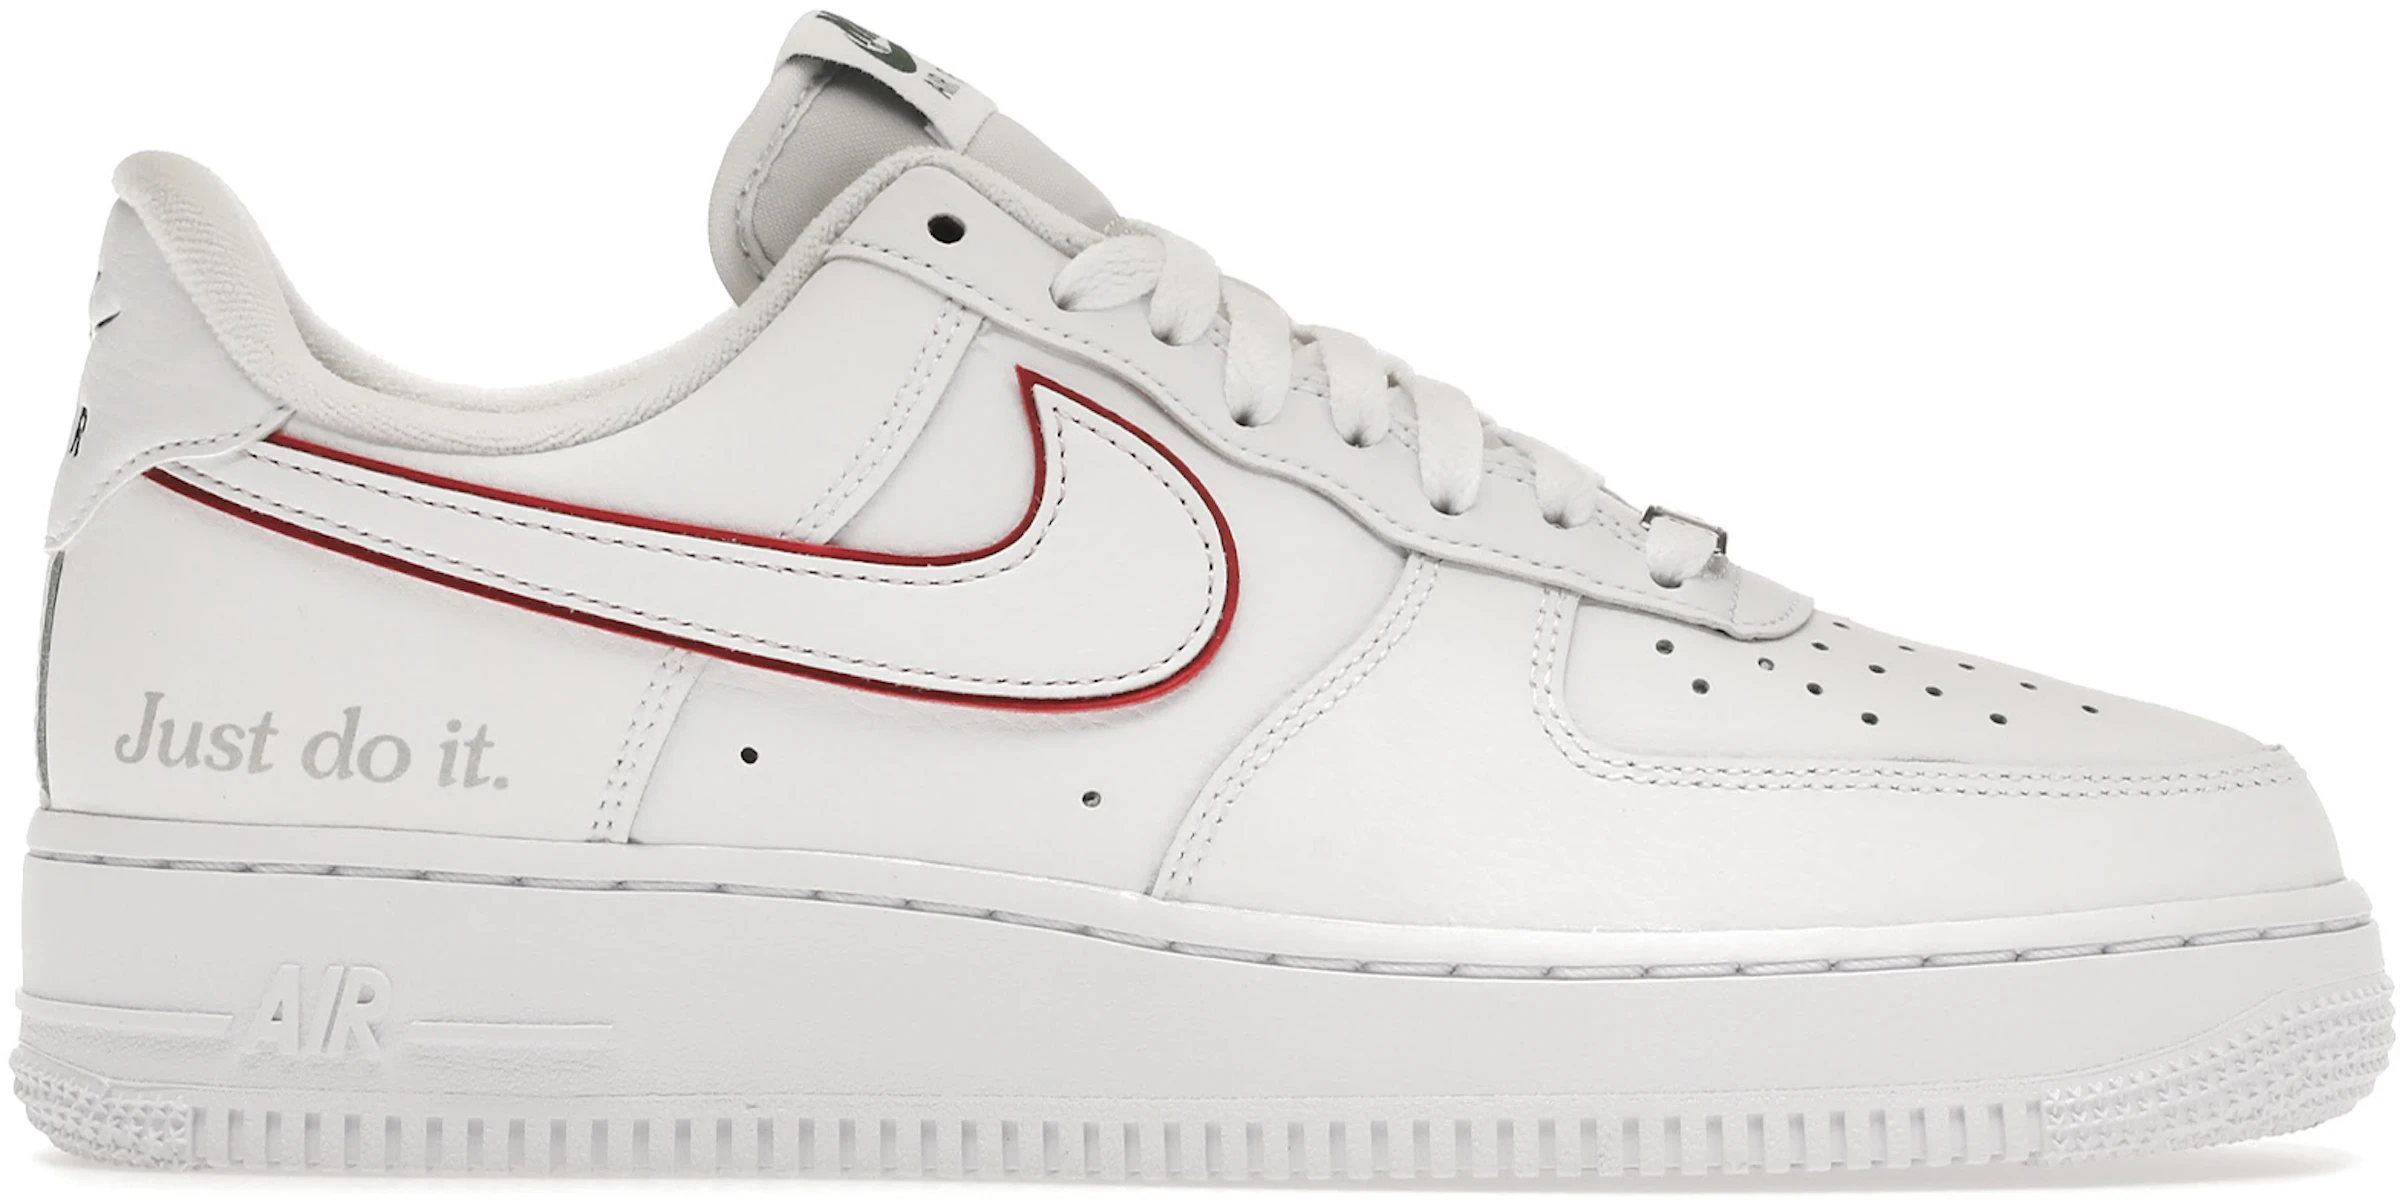 Nike Air Force 1 Low Just Do It White Noble Green Metallic Silver University Red - DQ0791-100 ES